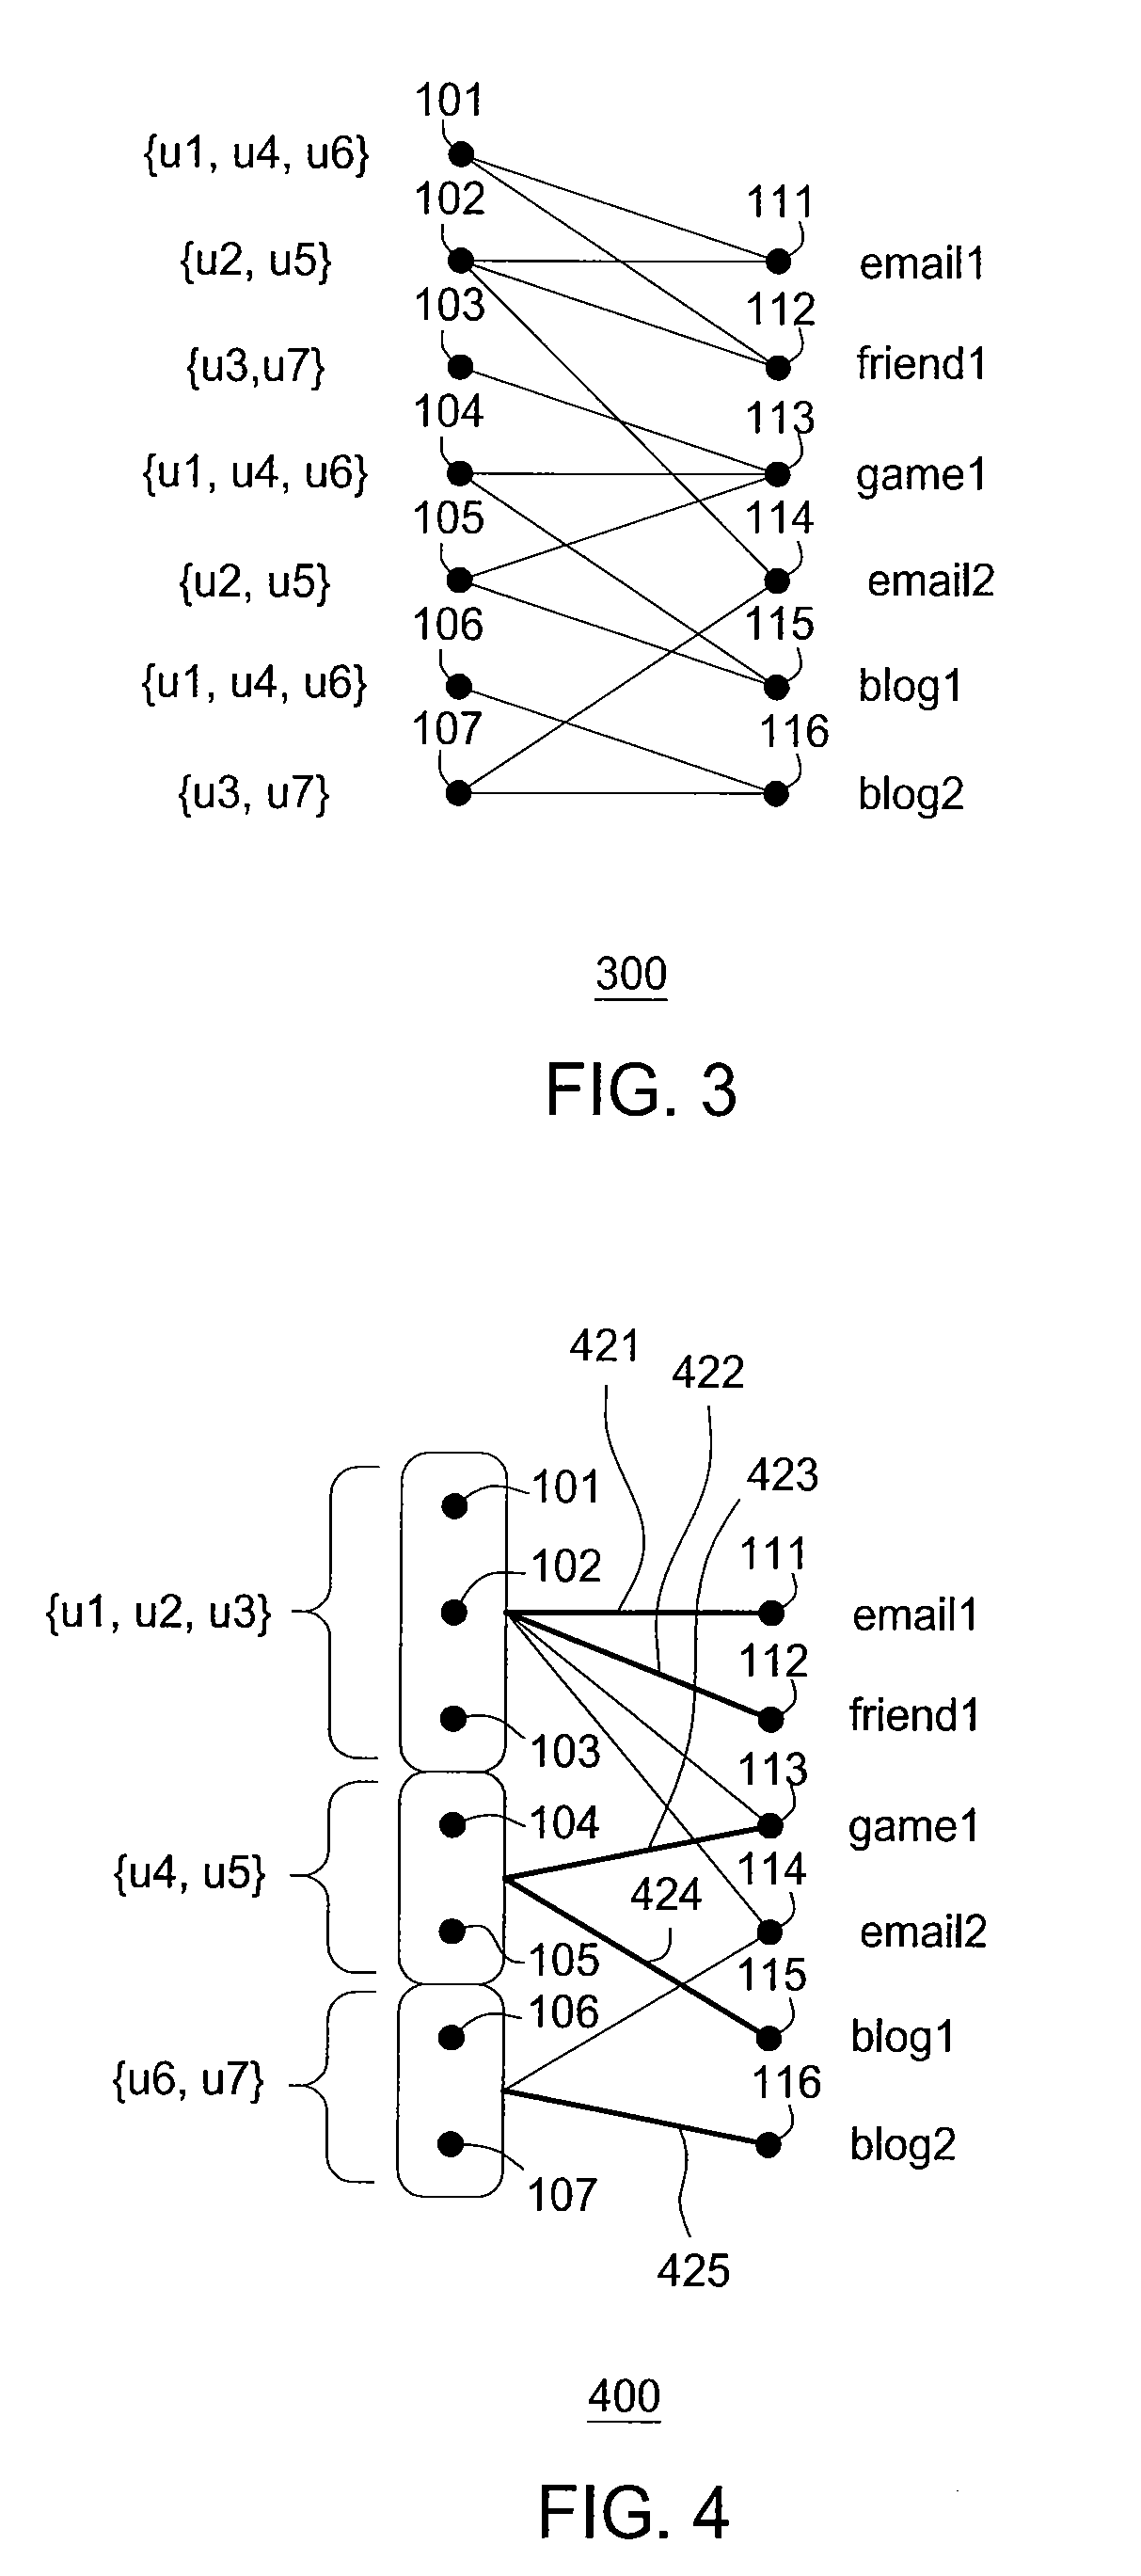 Method and apparatus for providing anonymization of data